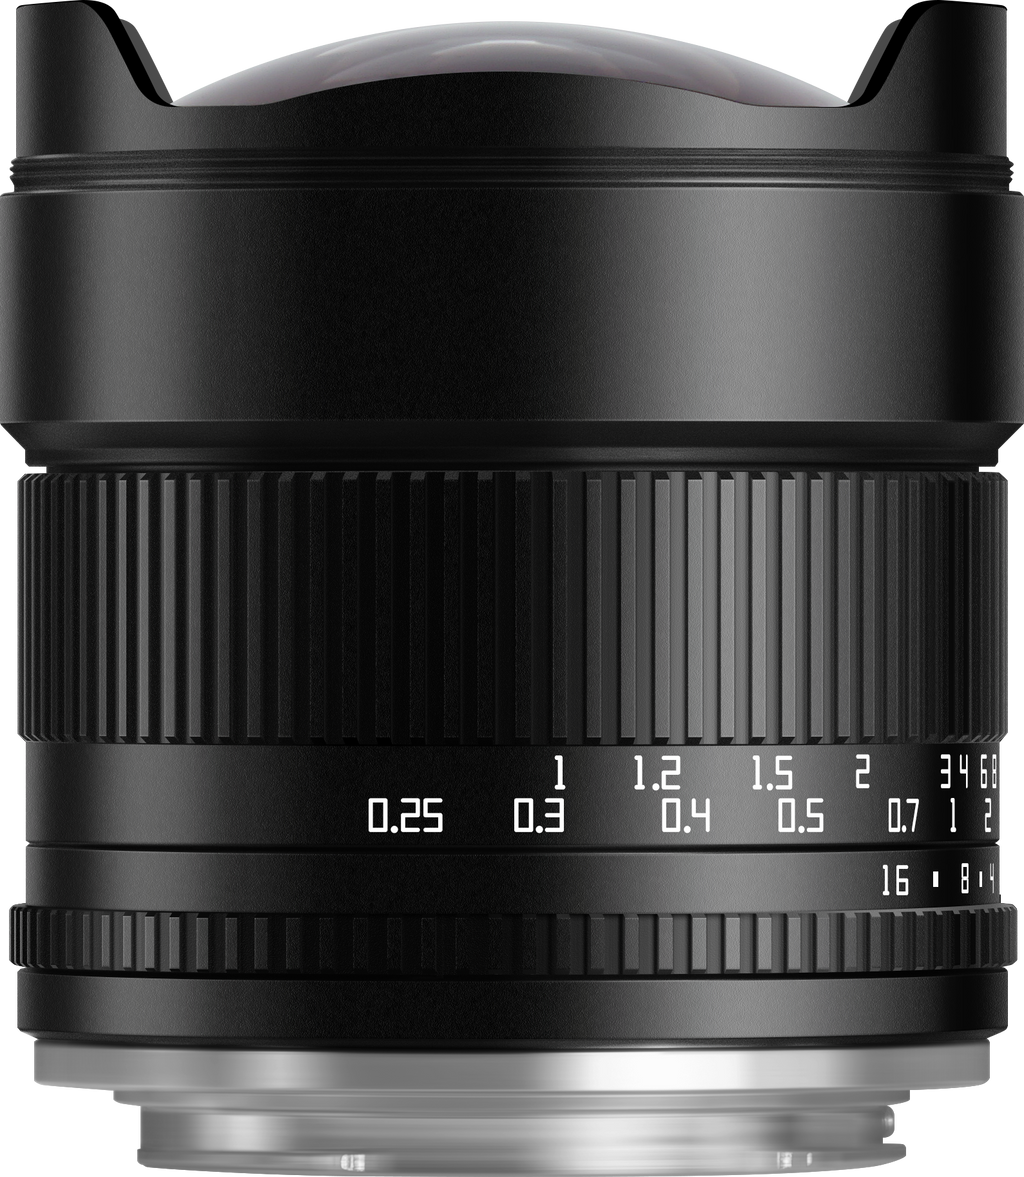 TTArtisan 10mm F2.0 Ultra-Wide Angle Lens for APS-C Mirrorless 